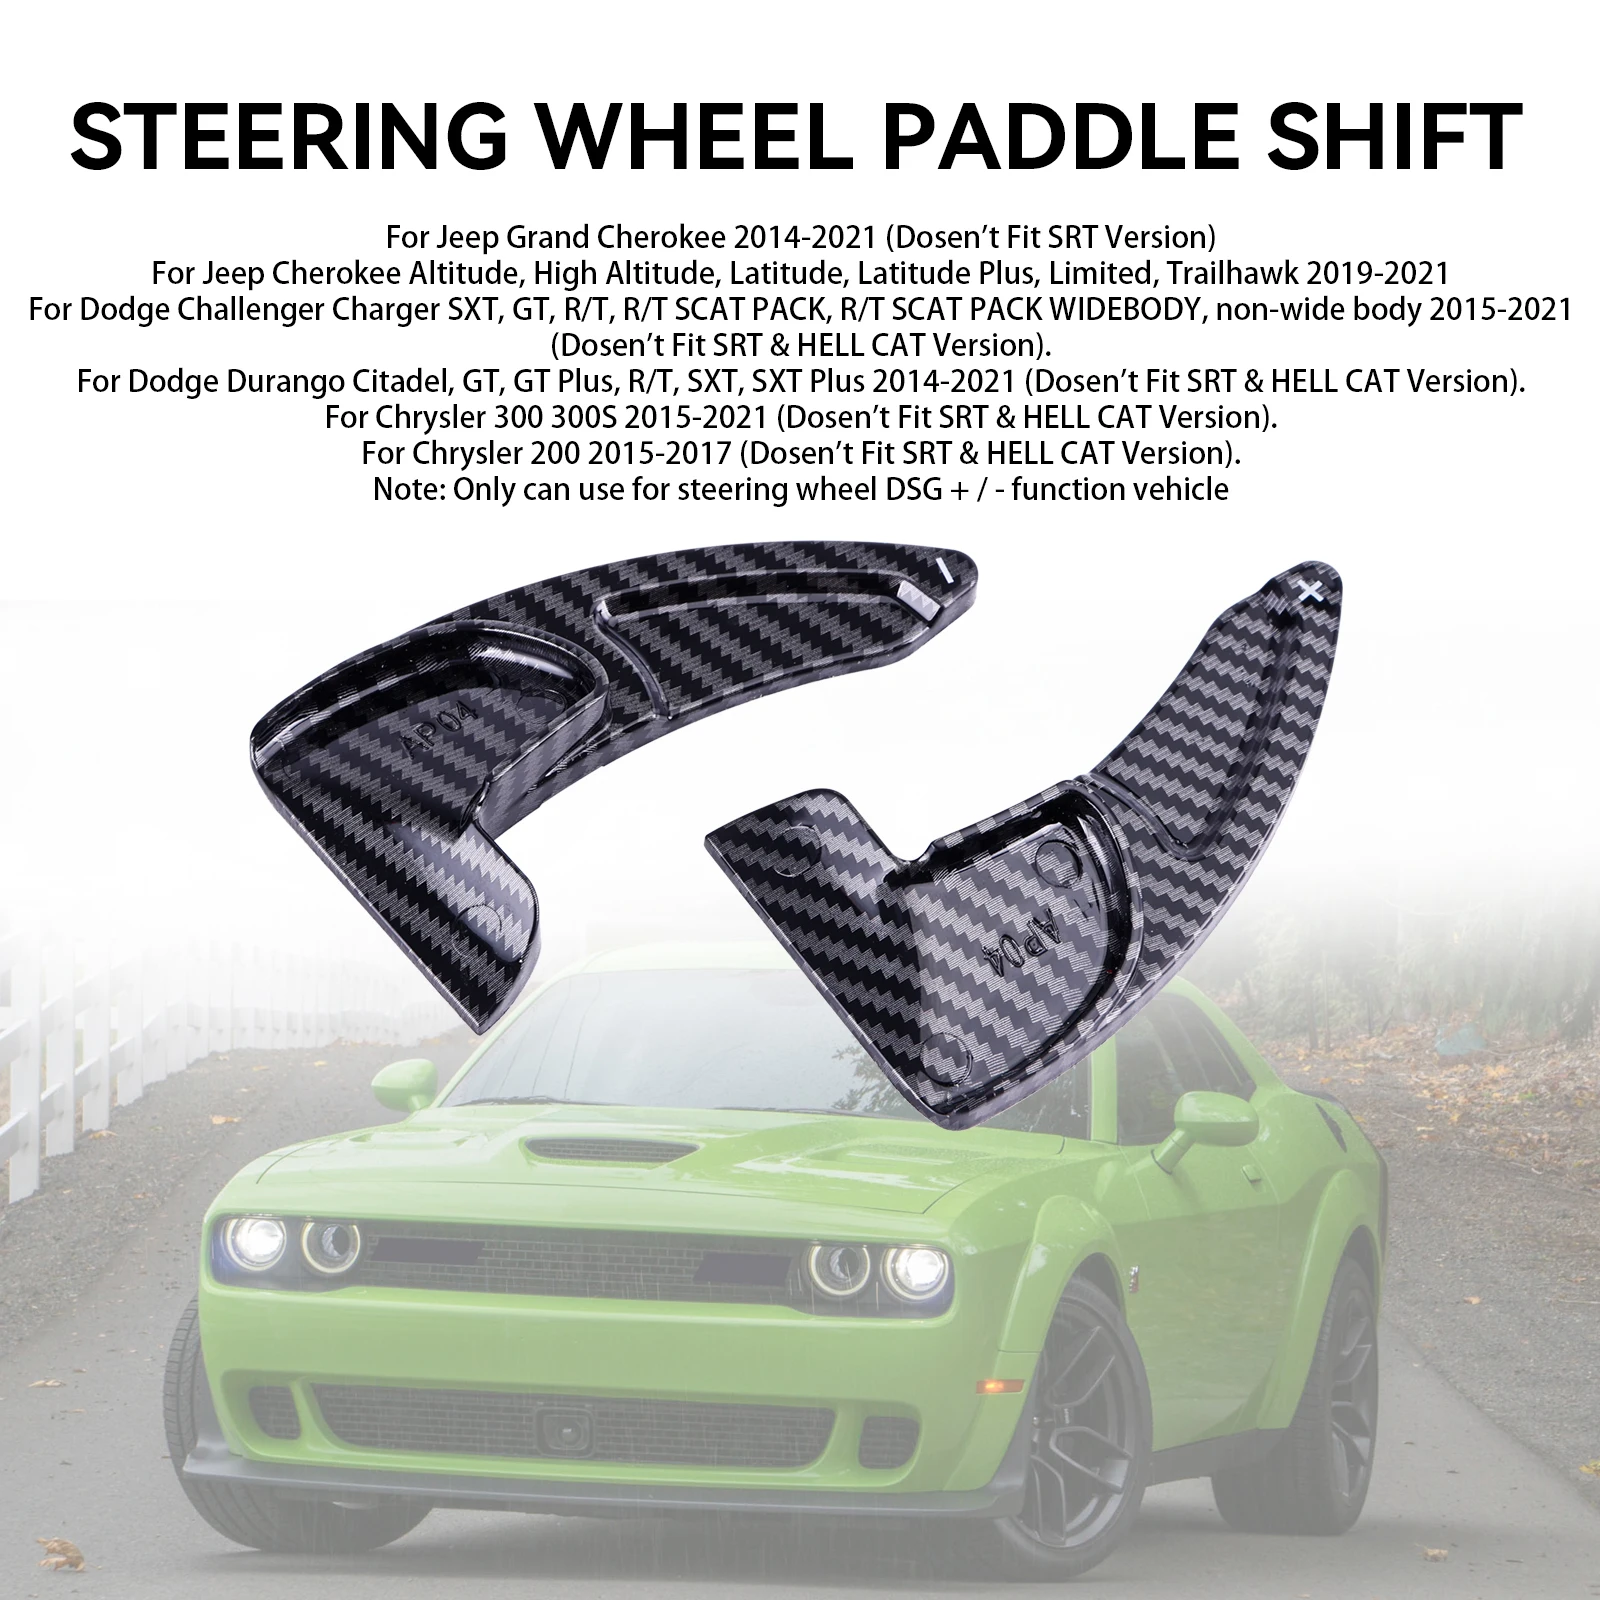 Shift Paddle Extended Shifter Trim Fit For Dodge Challenger Charger Car Accessories